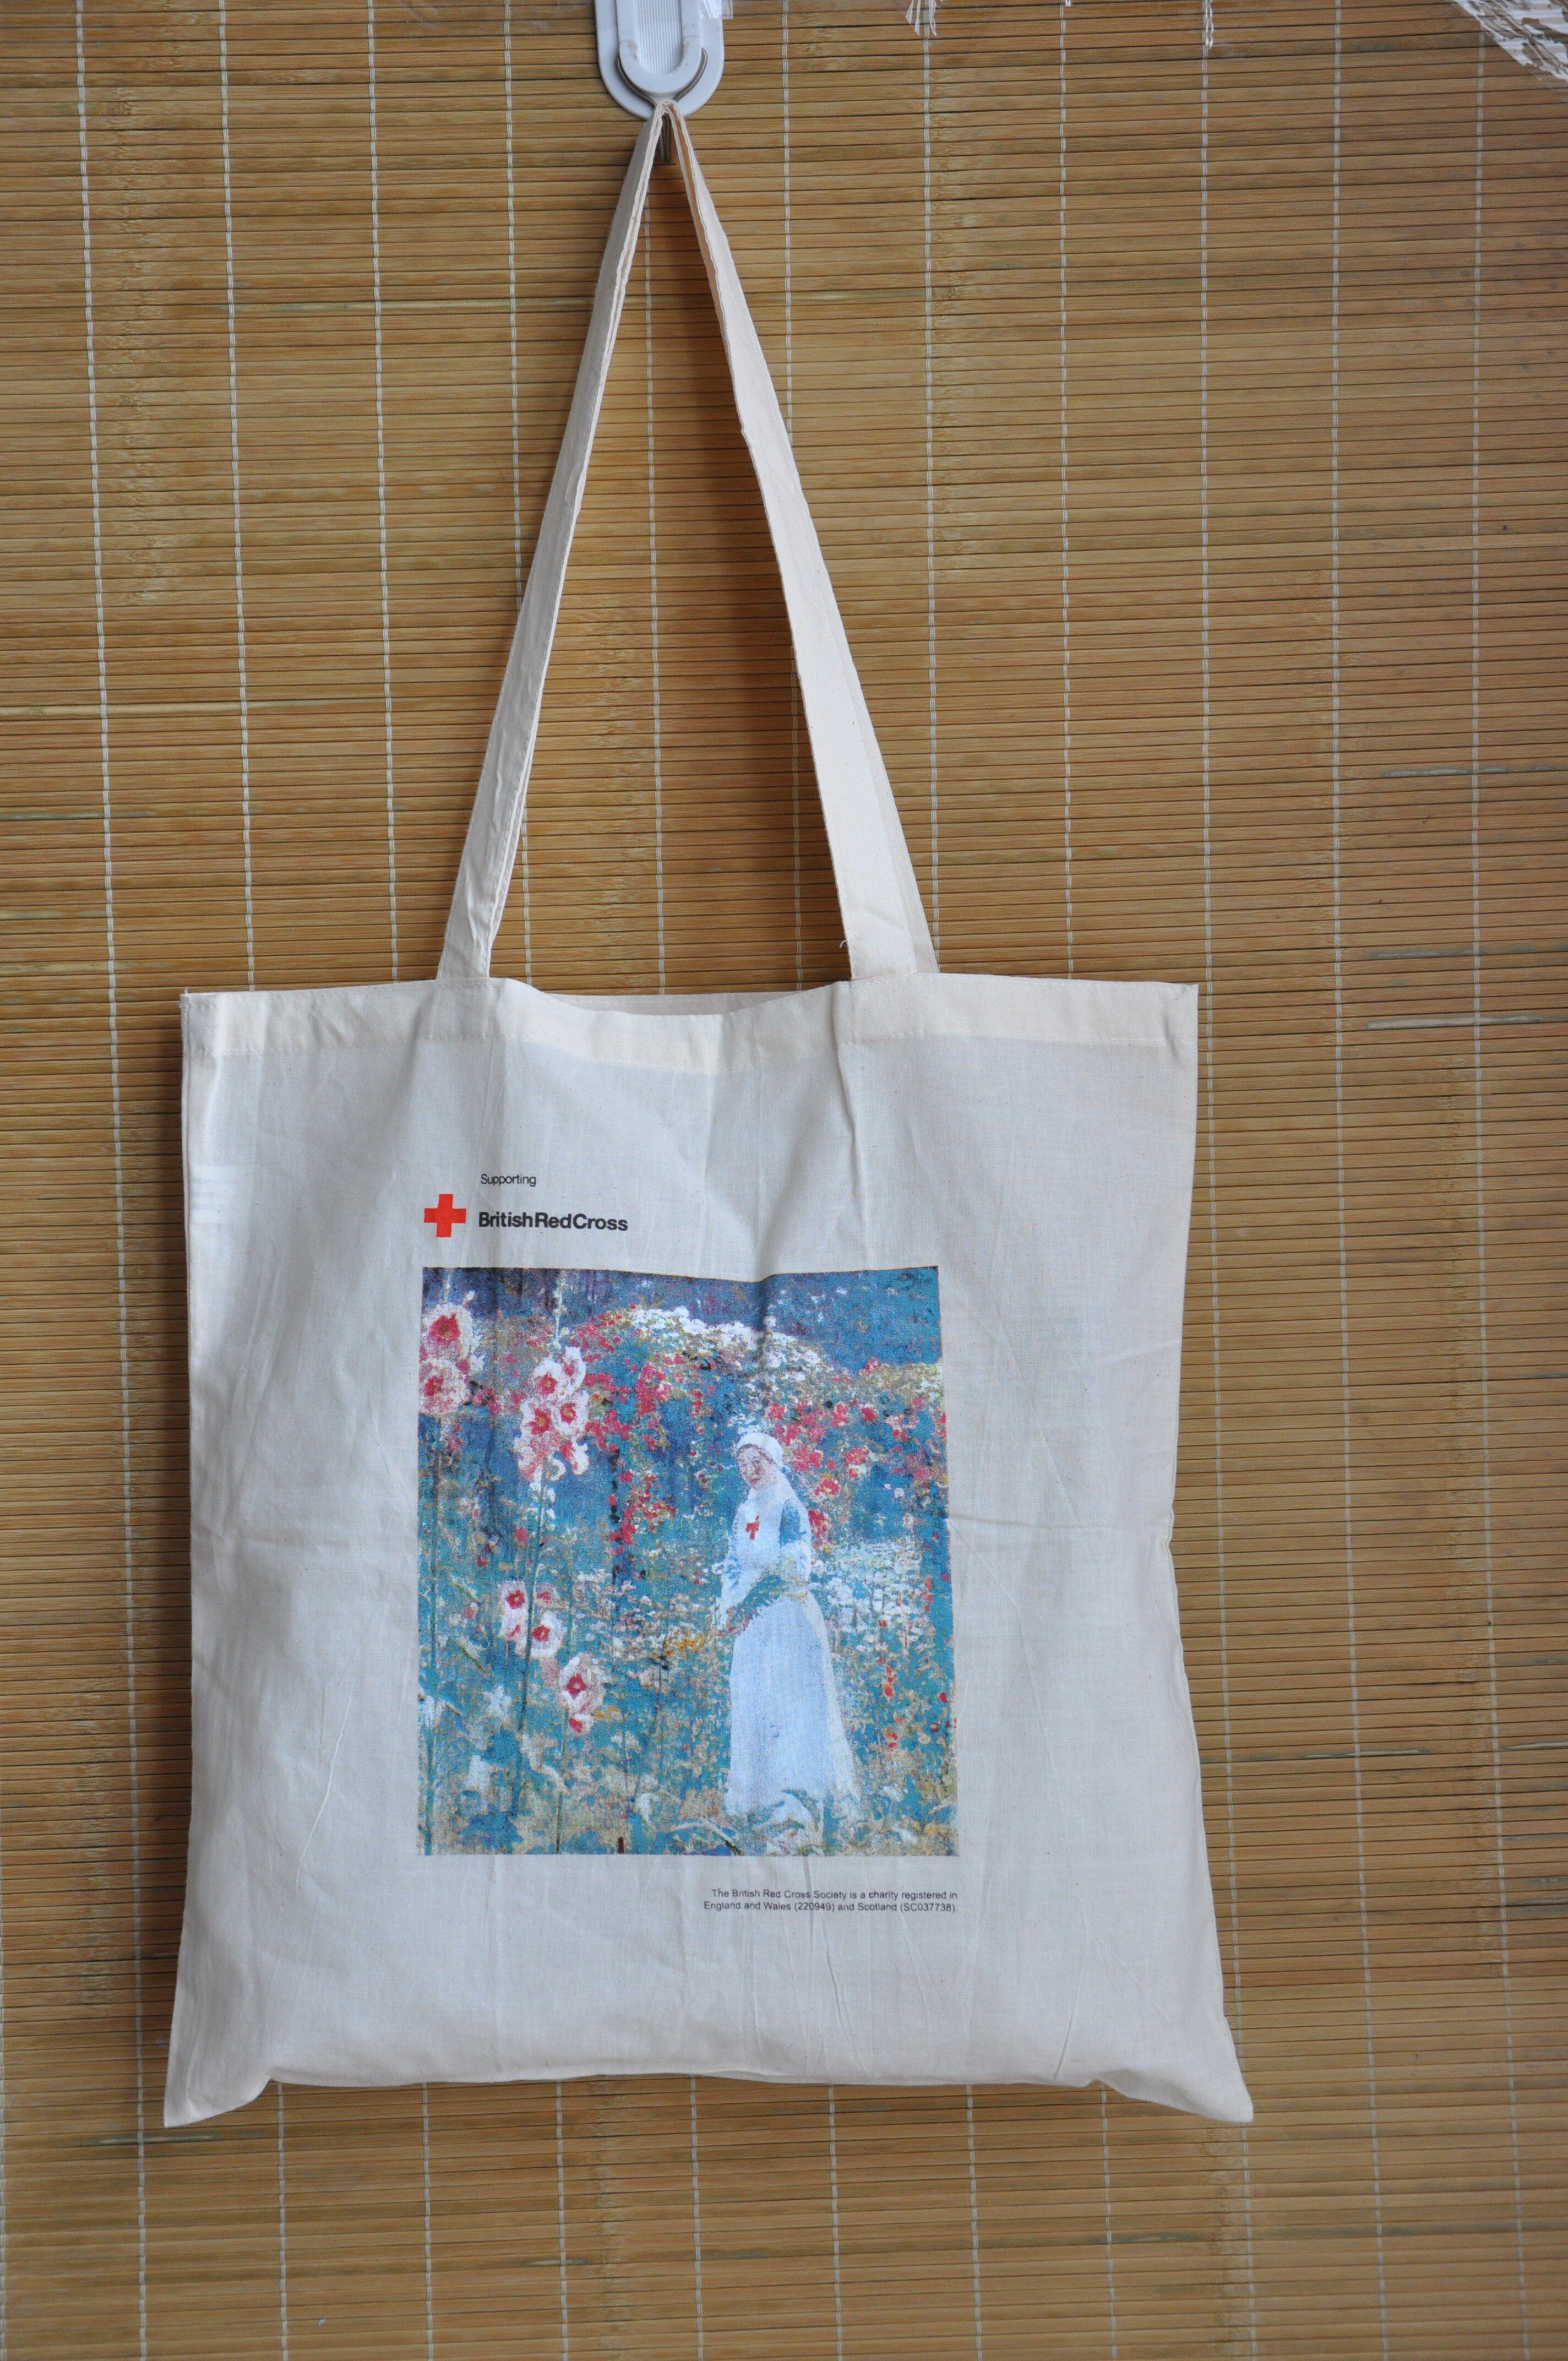 cheap branded cotton bags uk